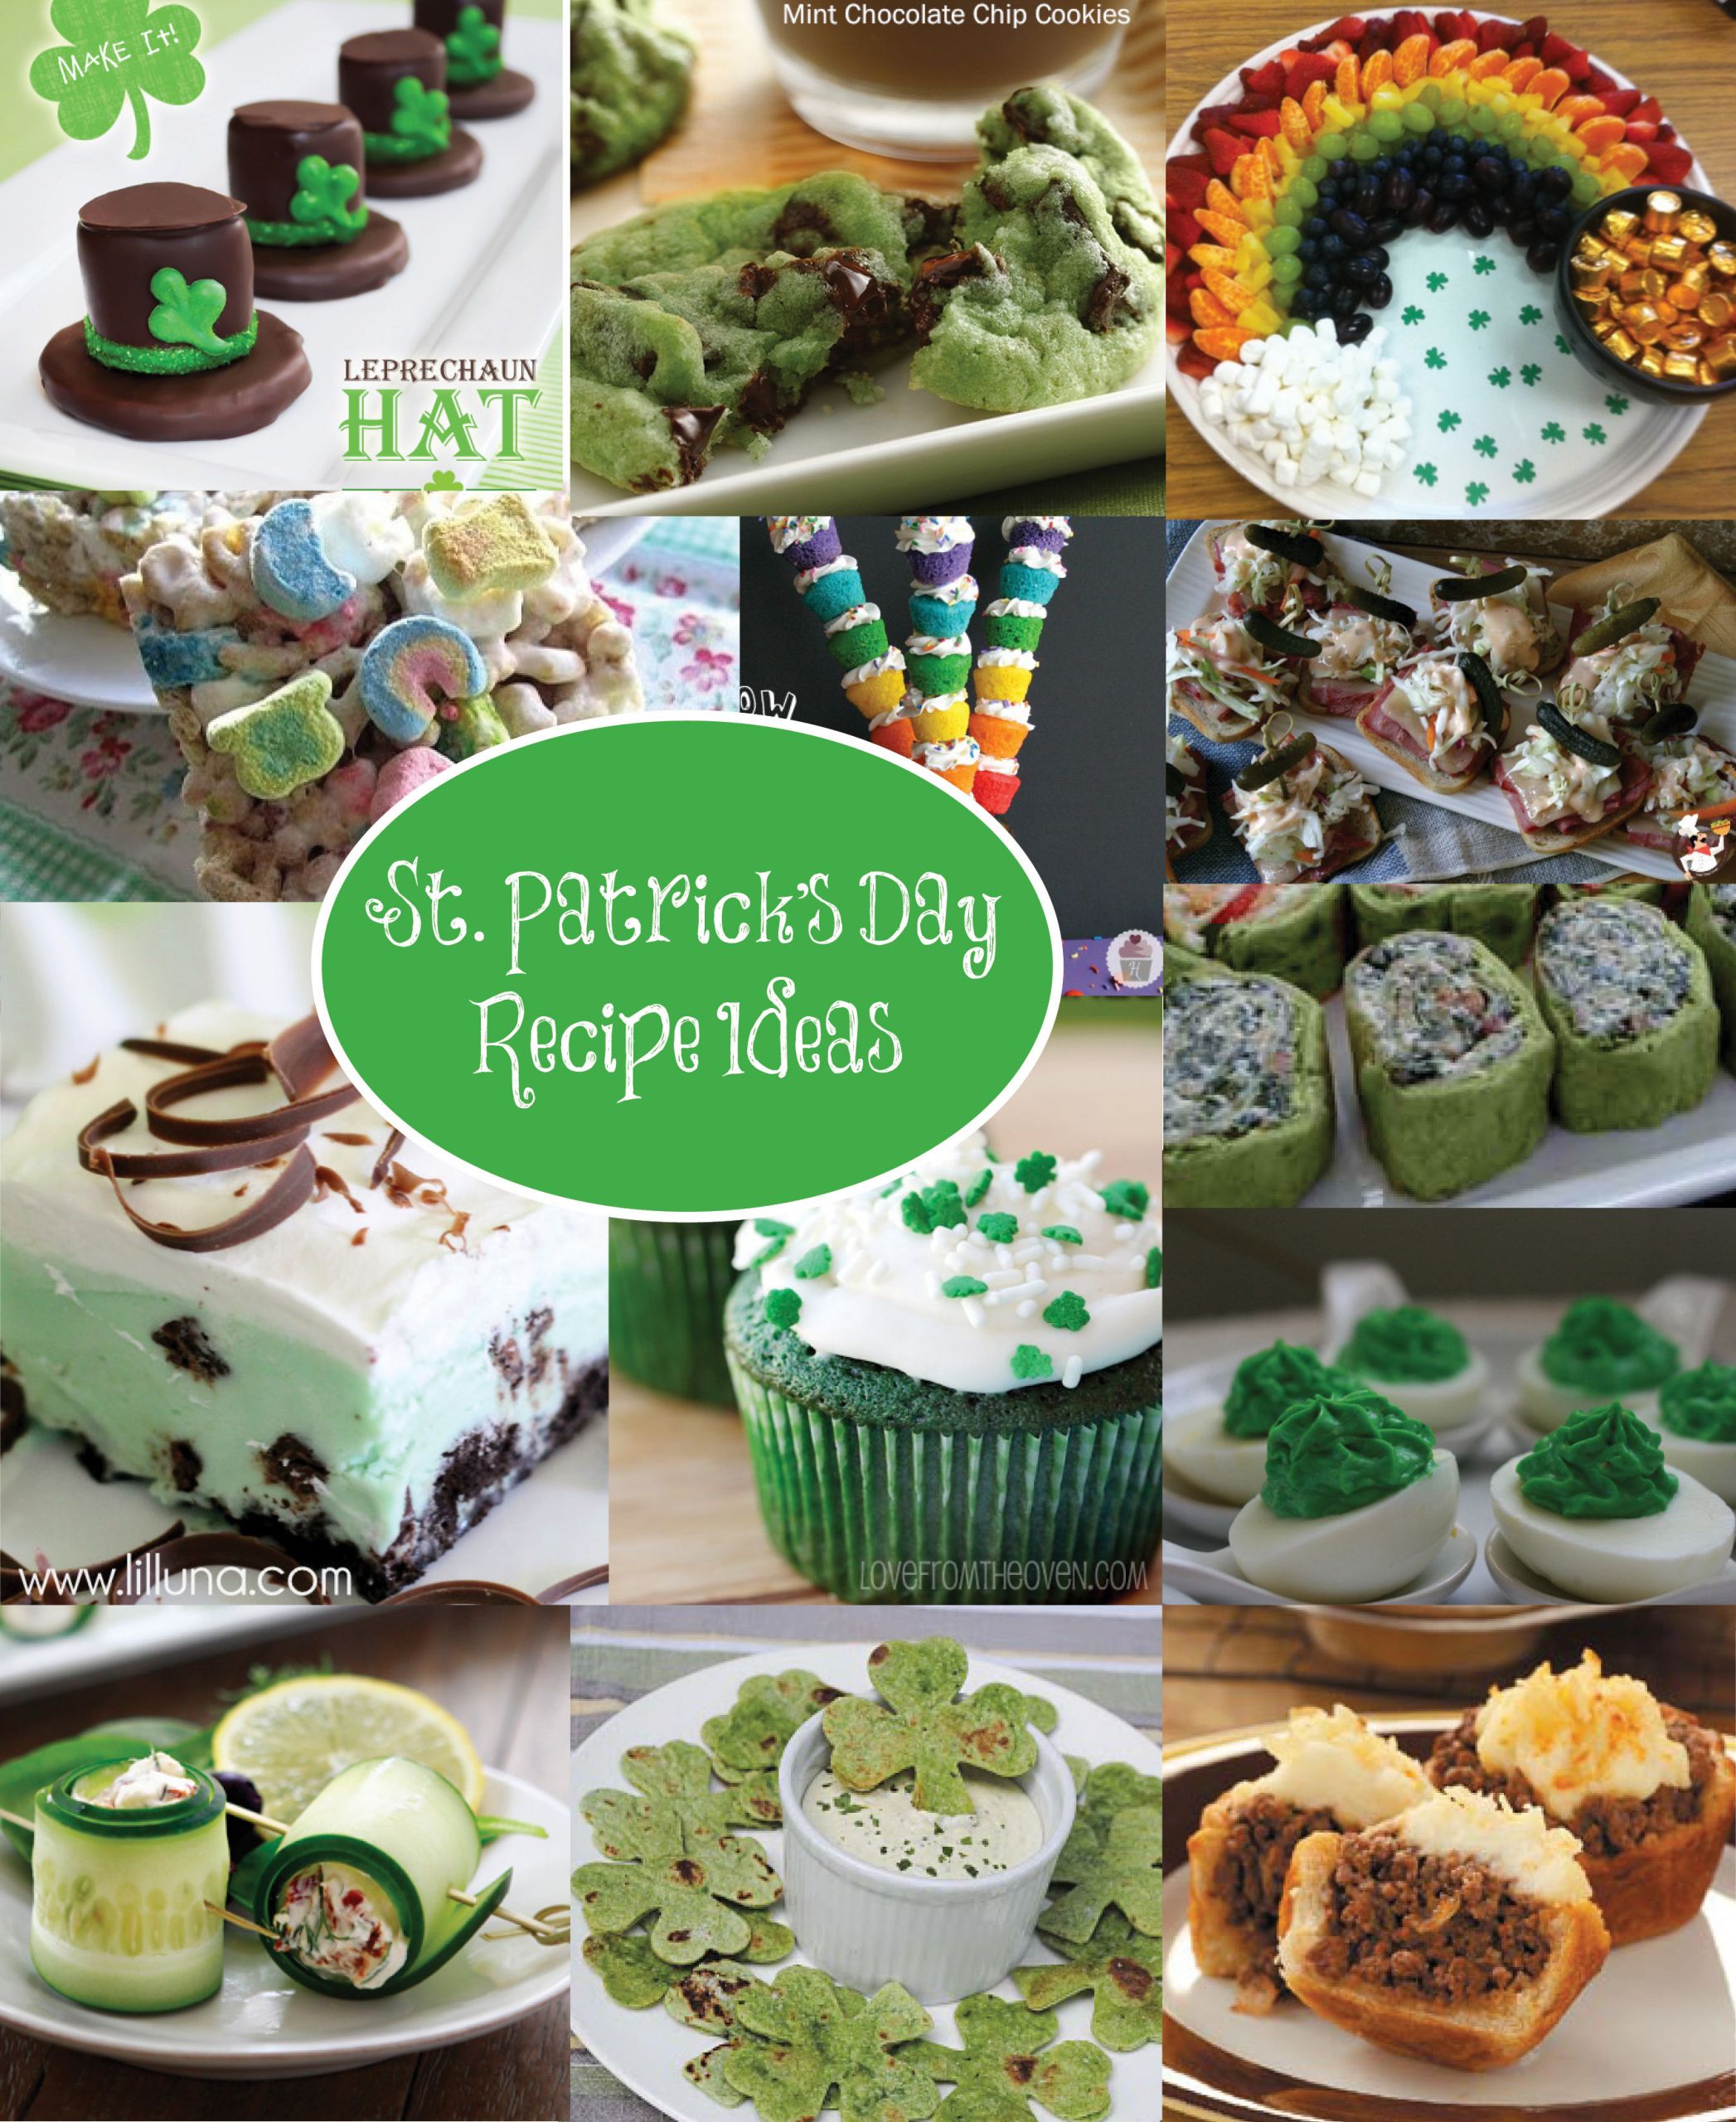 St Patrick's Day Food Ideas
 6 ideas to bring Irish fun into the workplace for St